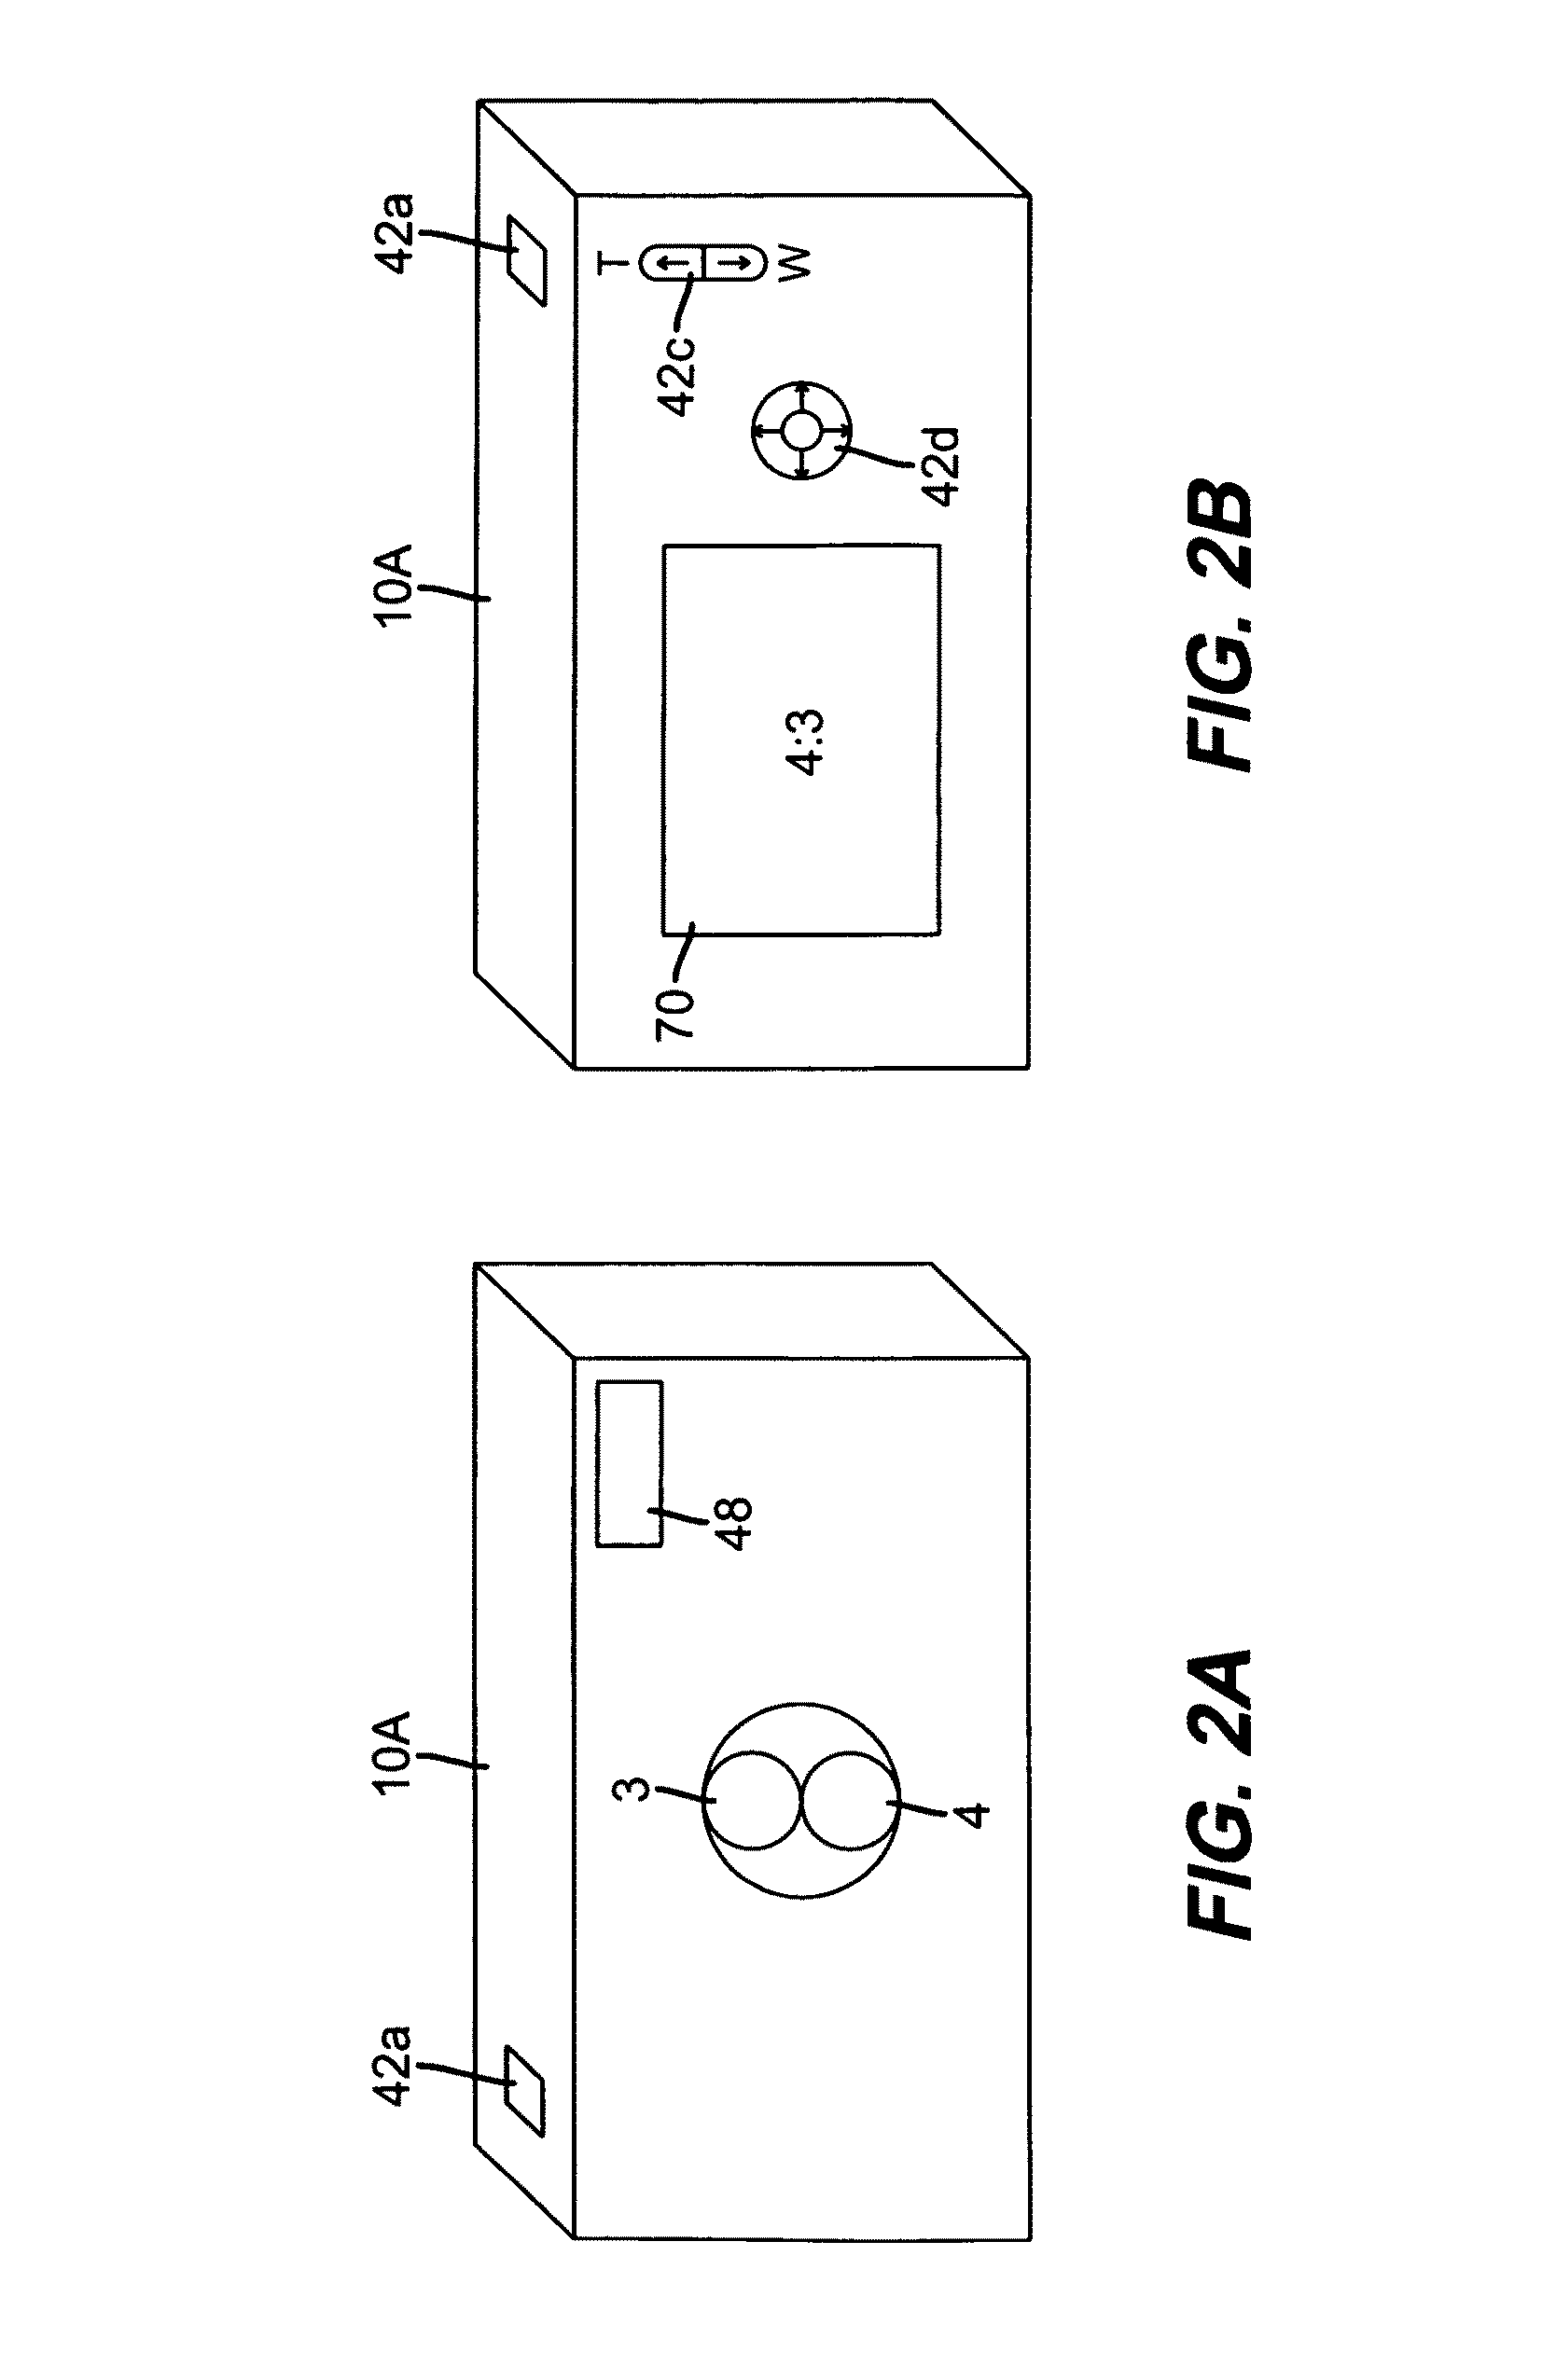 Camera using multiple lenses and image sensors to provide improved focusing capability